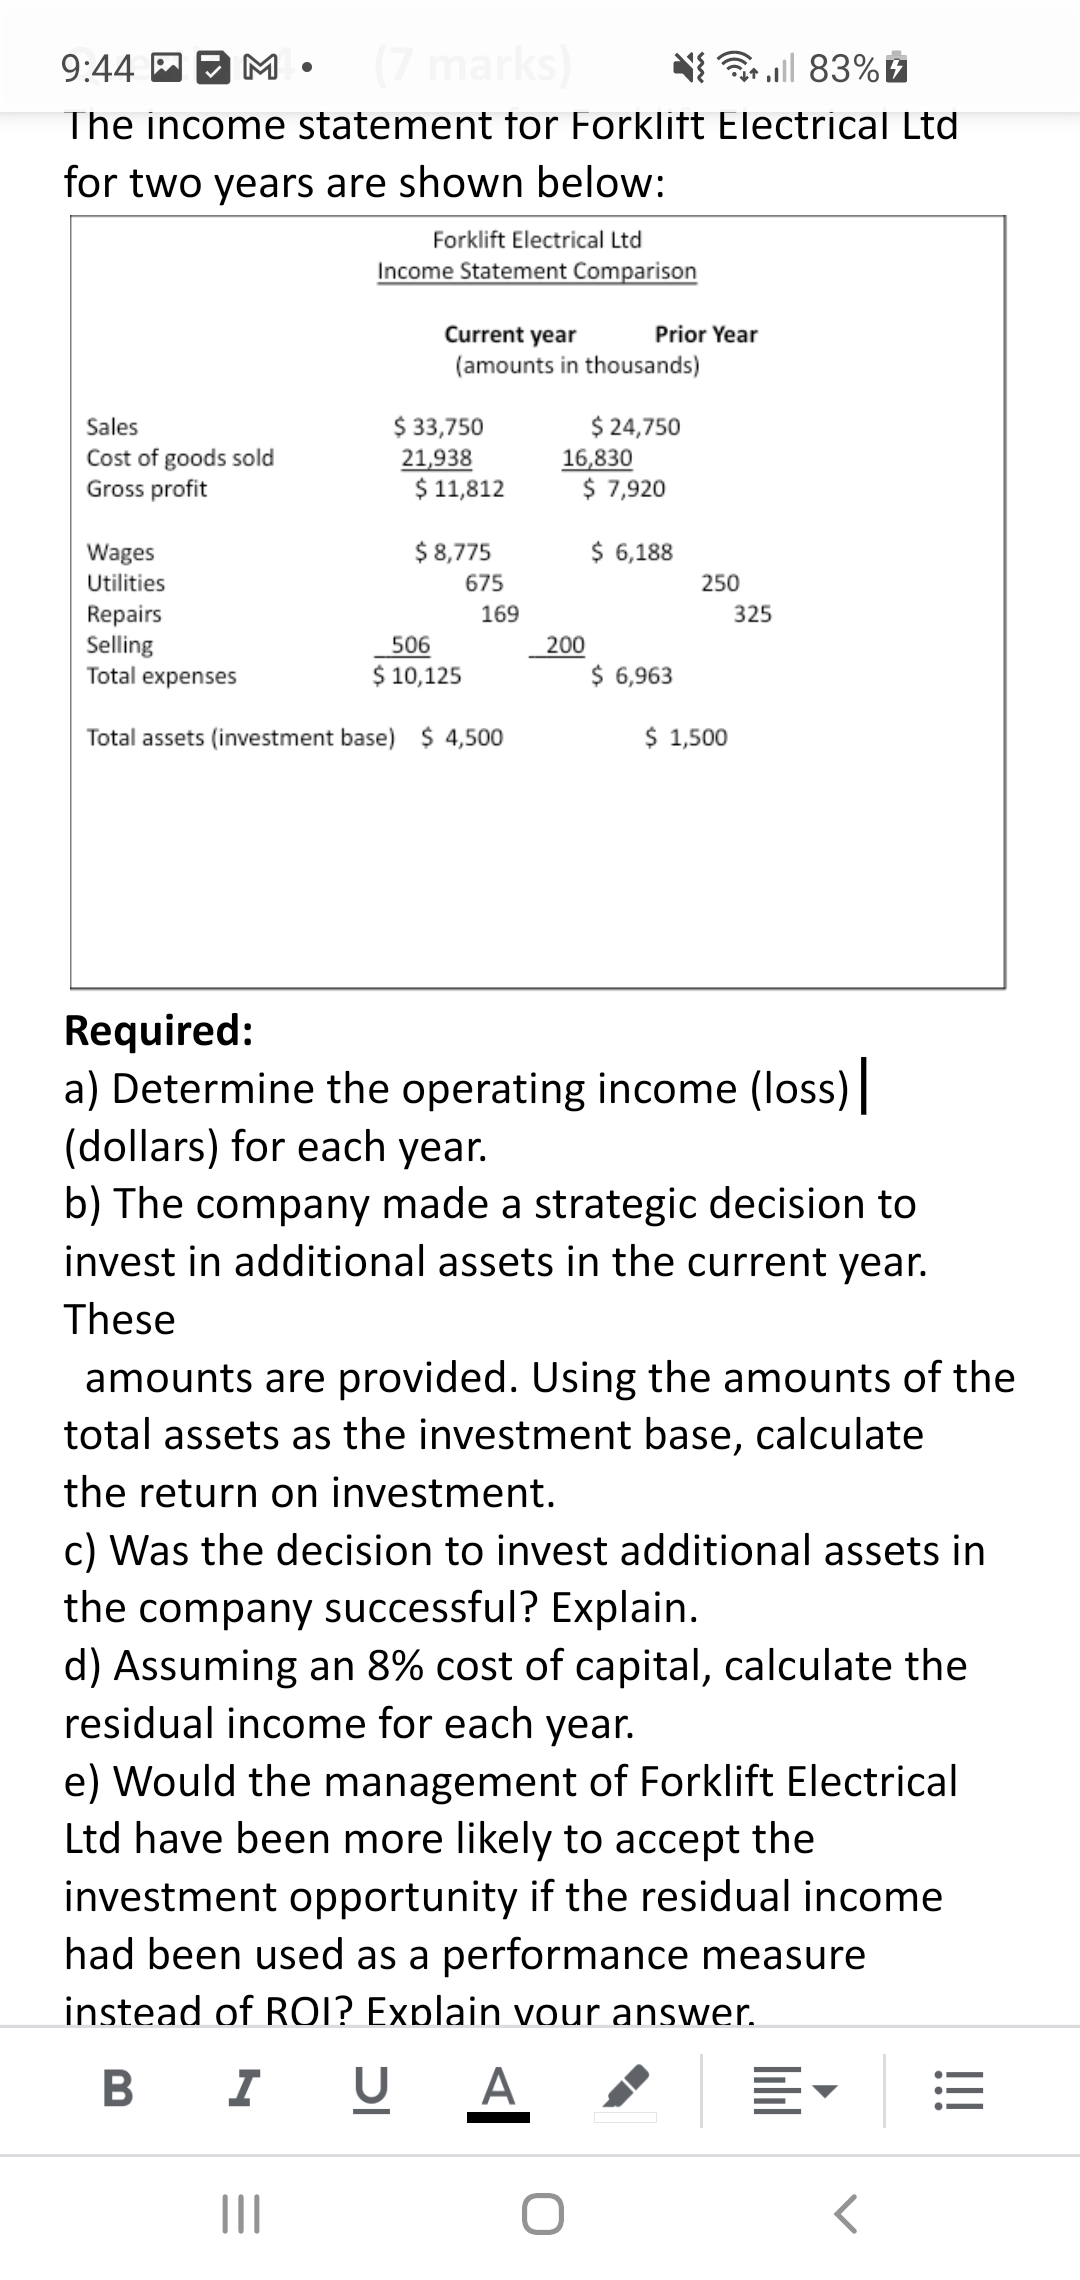 9:44 P D M
(7
all 83%
The income statement for Forklift Electrical Ltd
for two years are shown below:
Forklift Electrical Ltd
Income Statement Comparison
Current year
Prior Year
(amounts in thousands)
$ 33,750
21,938
$ 11,812
$ 24,750
16,830
$ 7,920
Sales
Cost of goods sold
Gross profit
Wages
$ 8,775
$ 6,188
Utilities
675
250
Repairs
Selling
Total expenses
169
325
506
200
$ 10,125
$ 6,963
Total assets (investment base) $ 4,500
$ 1,500
Required:
a) Determine the operating income (loss)
(dollars) for each year.
b) The company made a strategic decision to
invest in additional assets in the current year.
These
amounts are provided. Using the amounts of the
total assets as the investment base, calculate
the return on investment.
c) Was the decision to invest additional assets in
the company successful? Explain.
d) Assuming an 8% cost of capital, calculate the
residual income for each year.
e) Would the management of Forklift Electrical
Ltd have been more likely to accept the
investment opportunity if the residual income
had been used as a performance measure
instead of ROI? Explain vour answer.
I U
A
!!!
